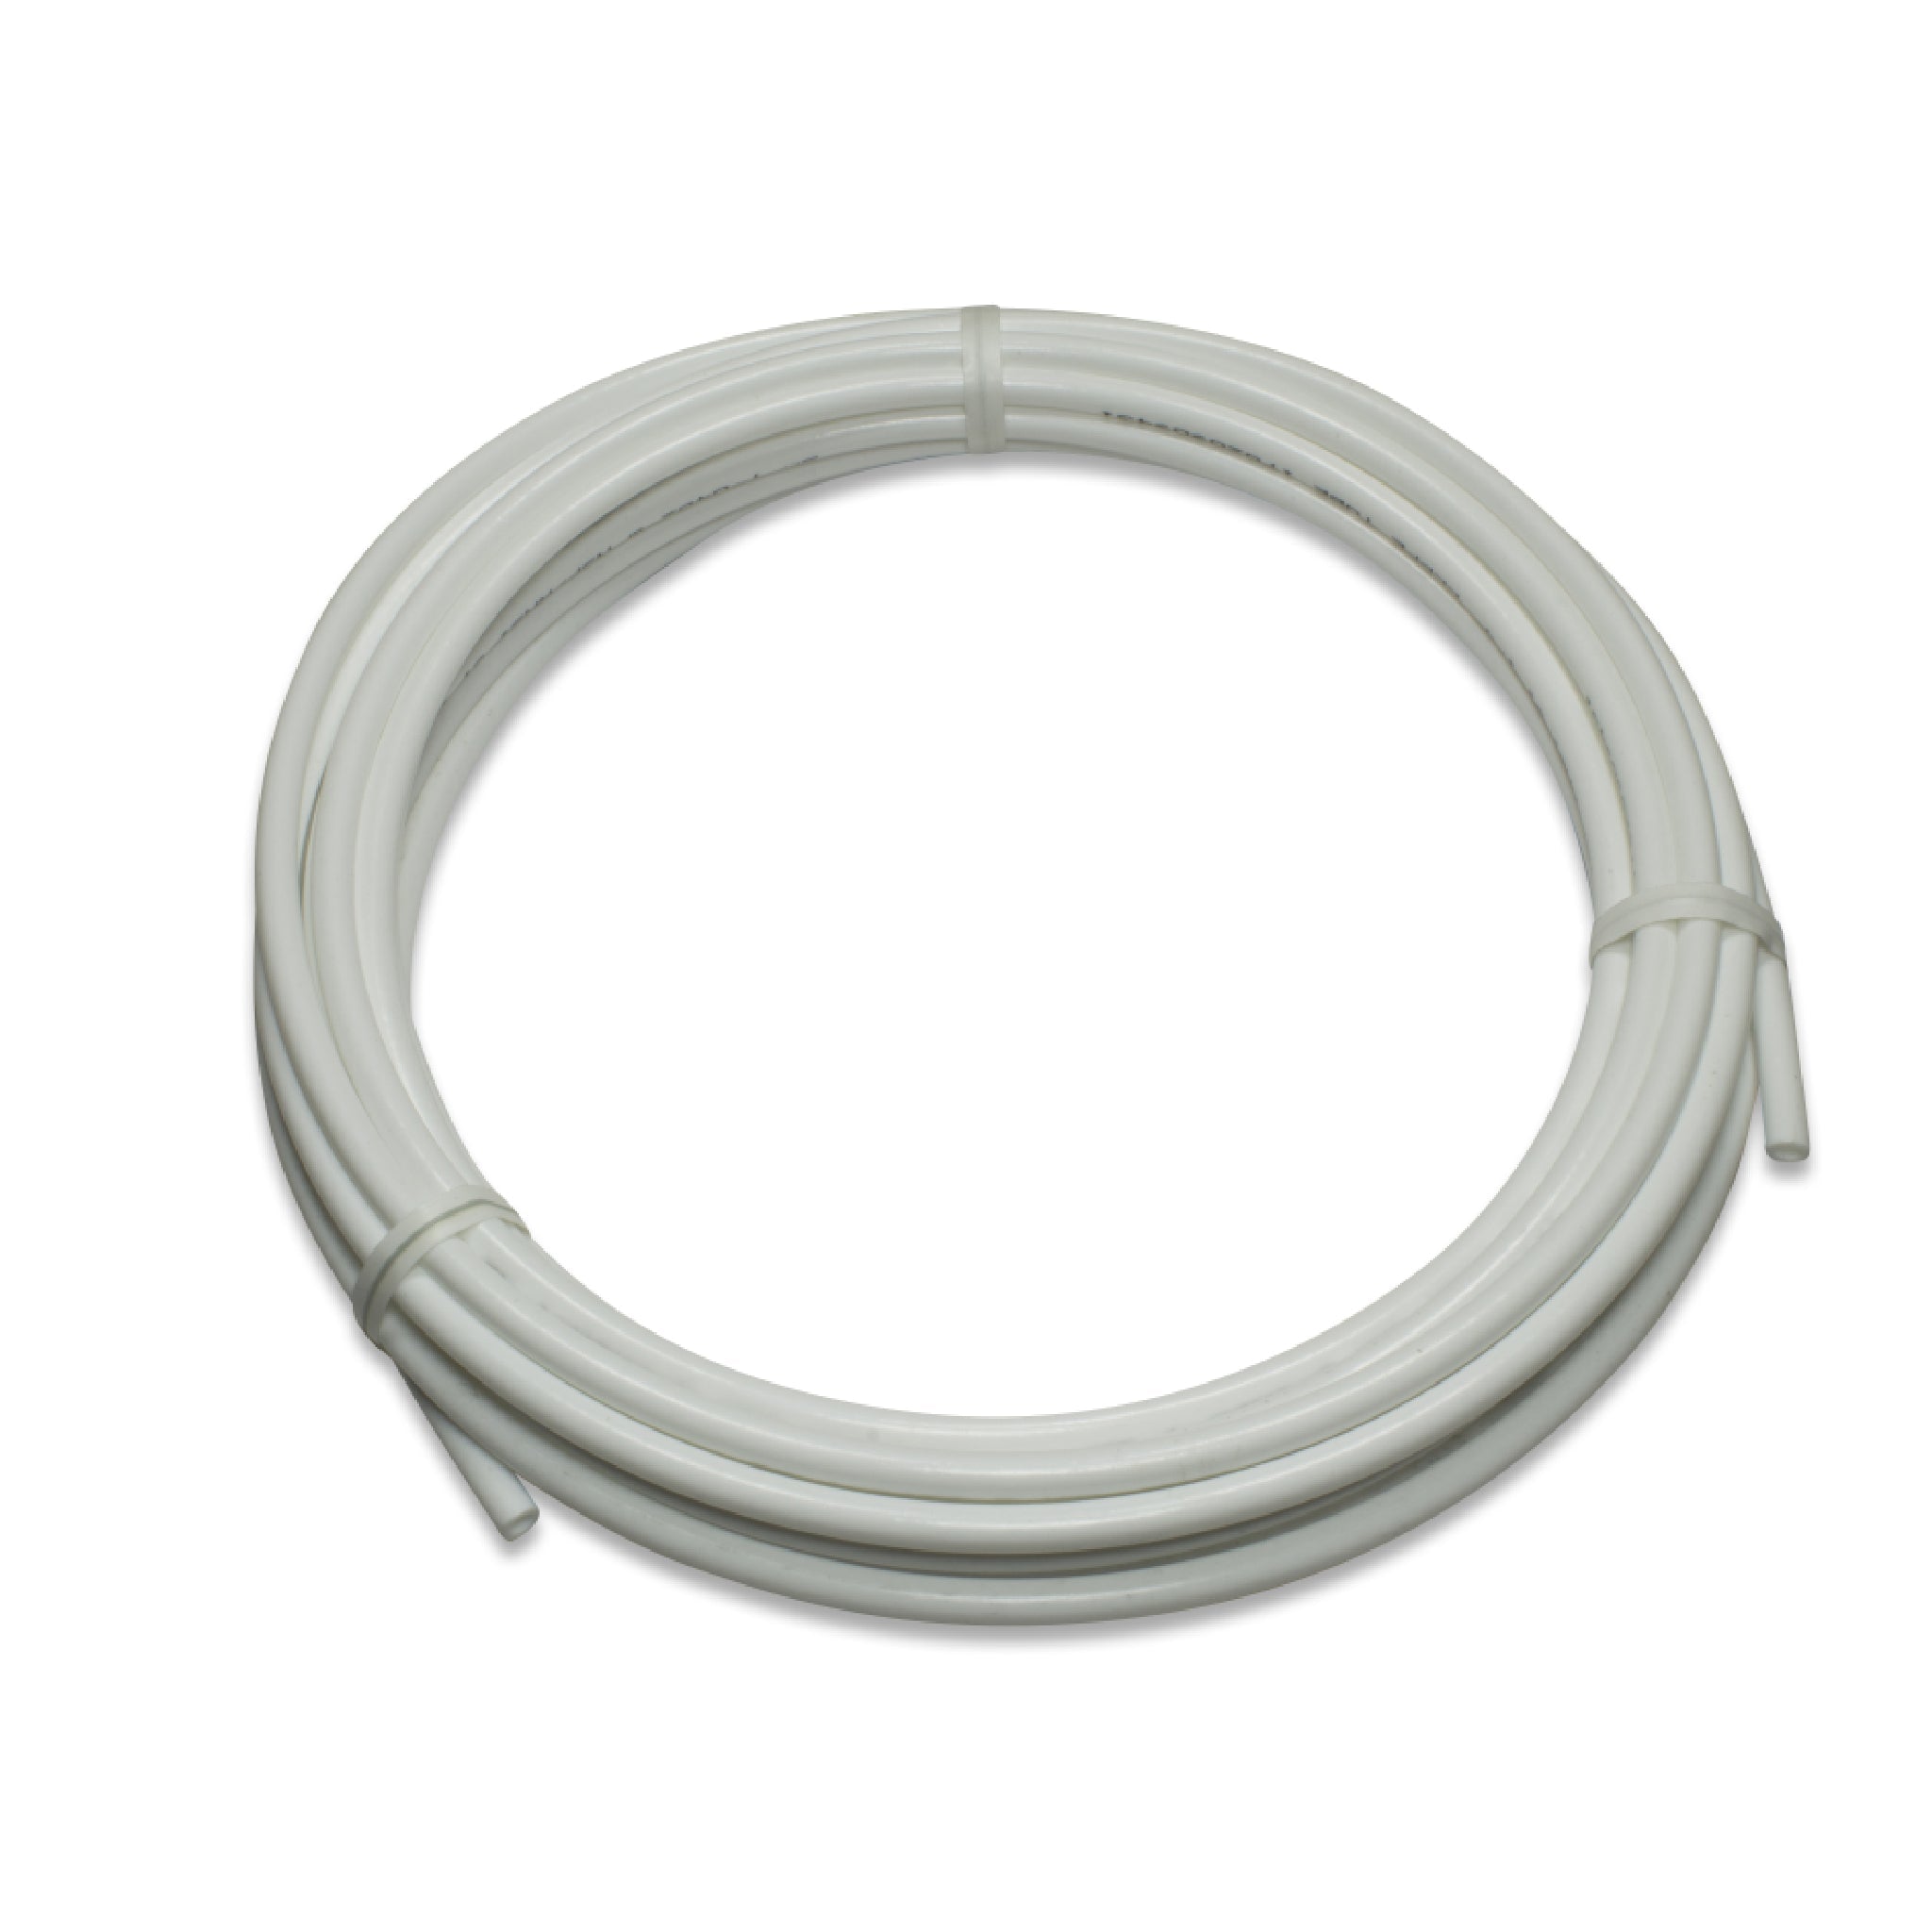 Metpure Ice Maker Fridge Installation Kit - 1/4" Fittings with 1/4" OD 25 Feet White Tubing for Potable Drinking Water